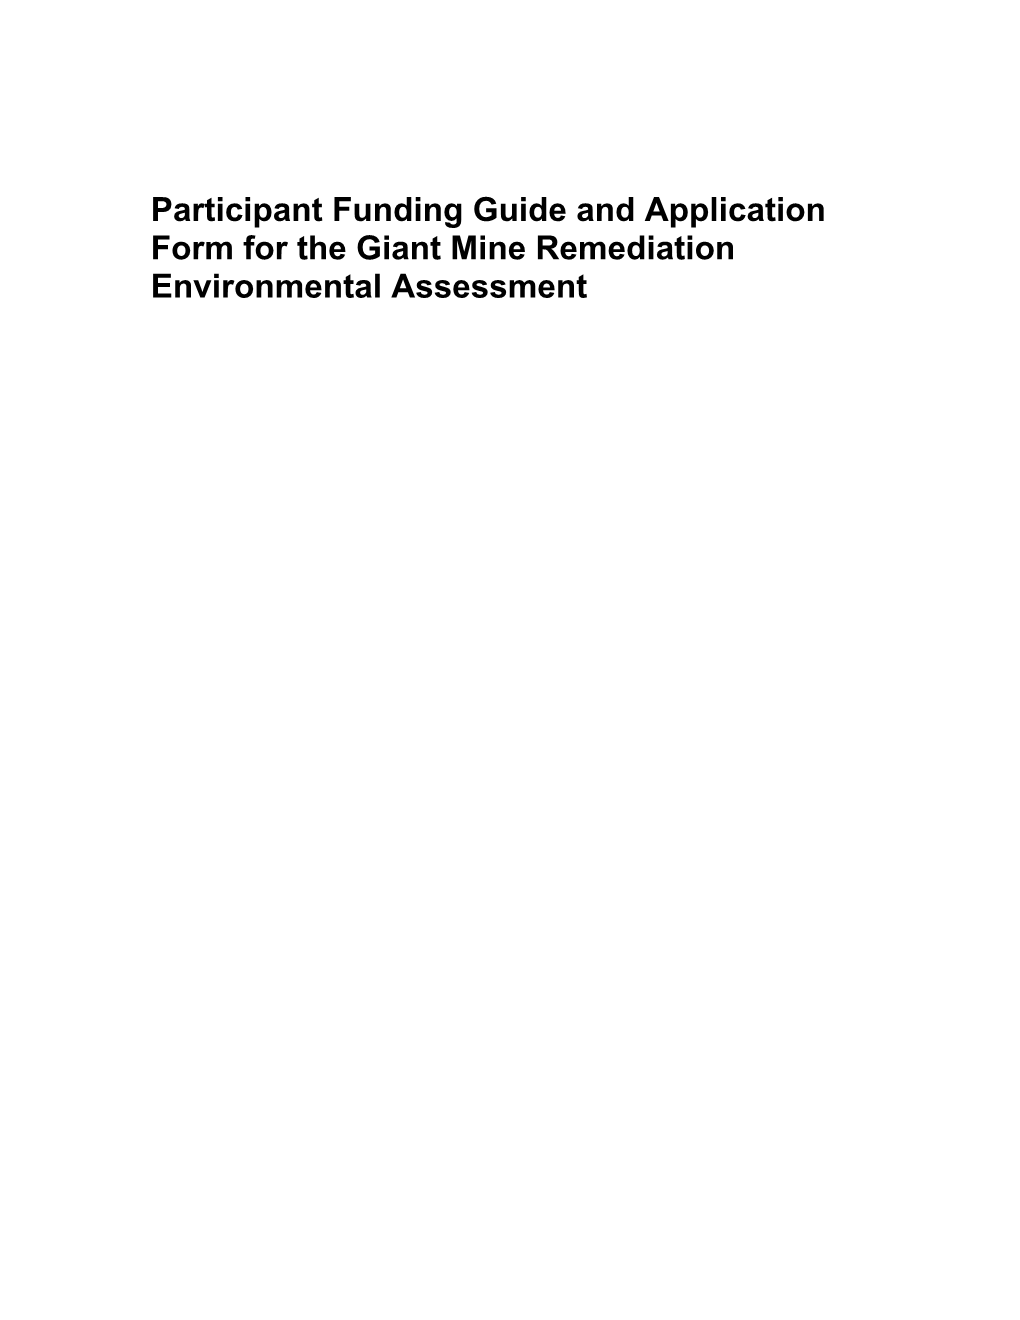 Participant Funding Guide and Application Formfor the Giant Mine Remediation Environmental